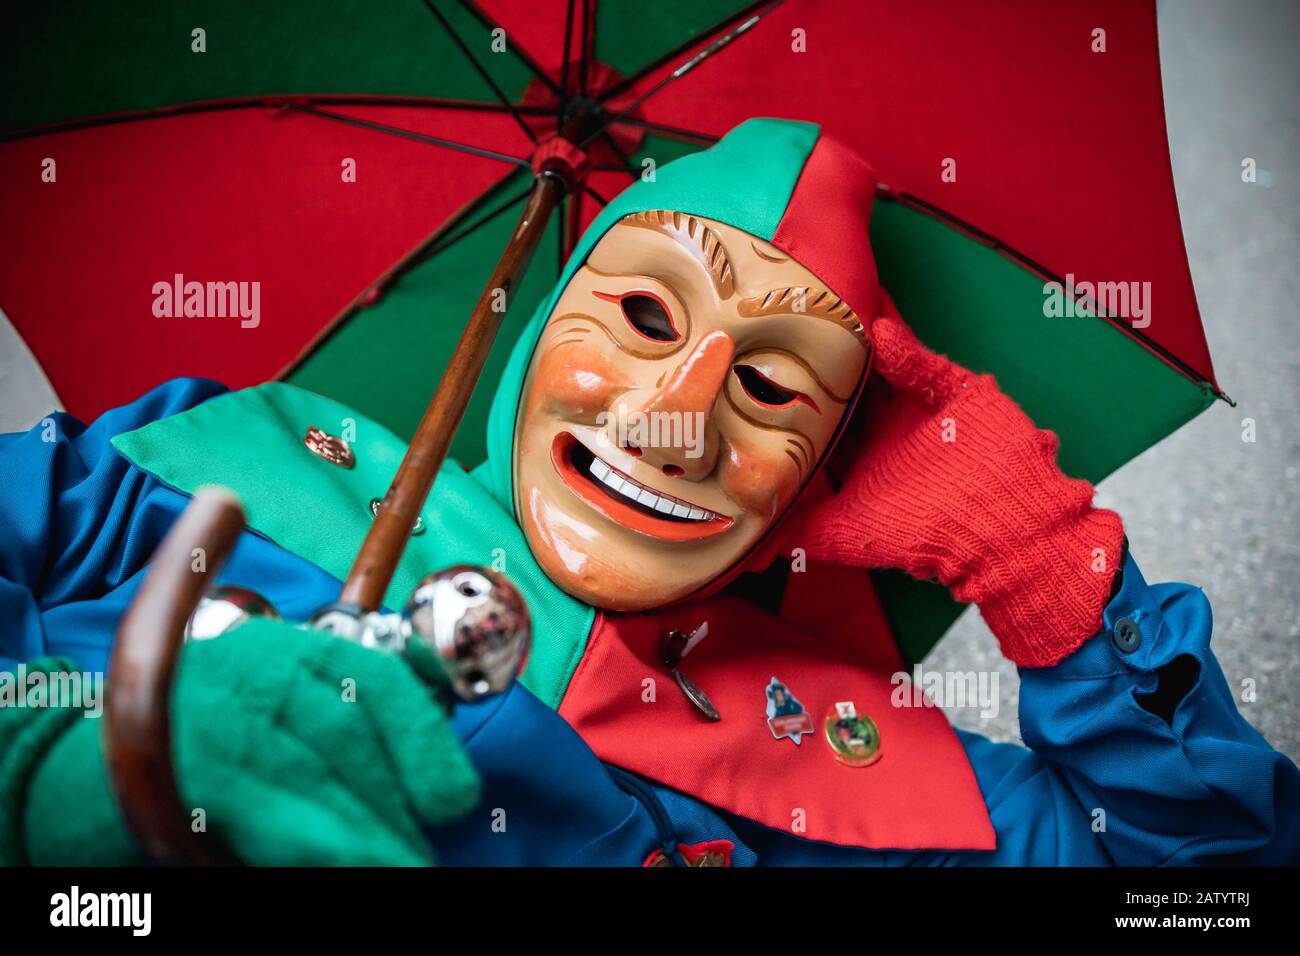 Oberwindemer Spitzbue - Carnival fool in red-green robe and umbrella rests on the floor. During the carnival parade in Staufen, southern Germany. Stock Photo